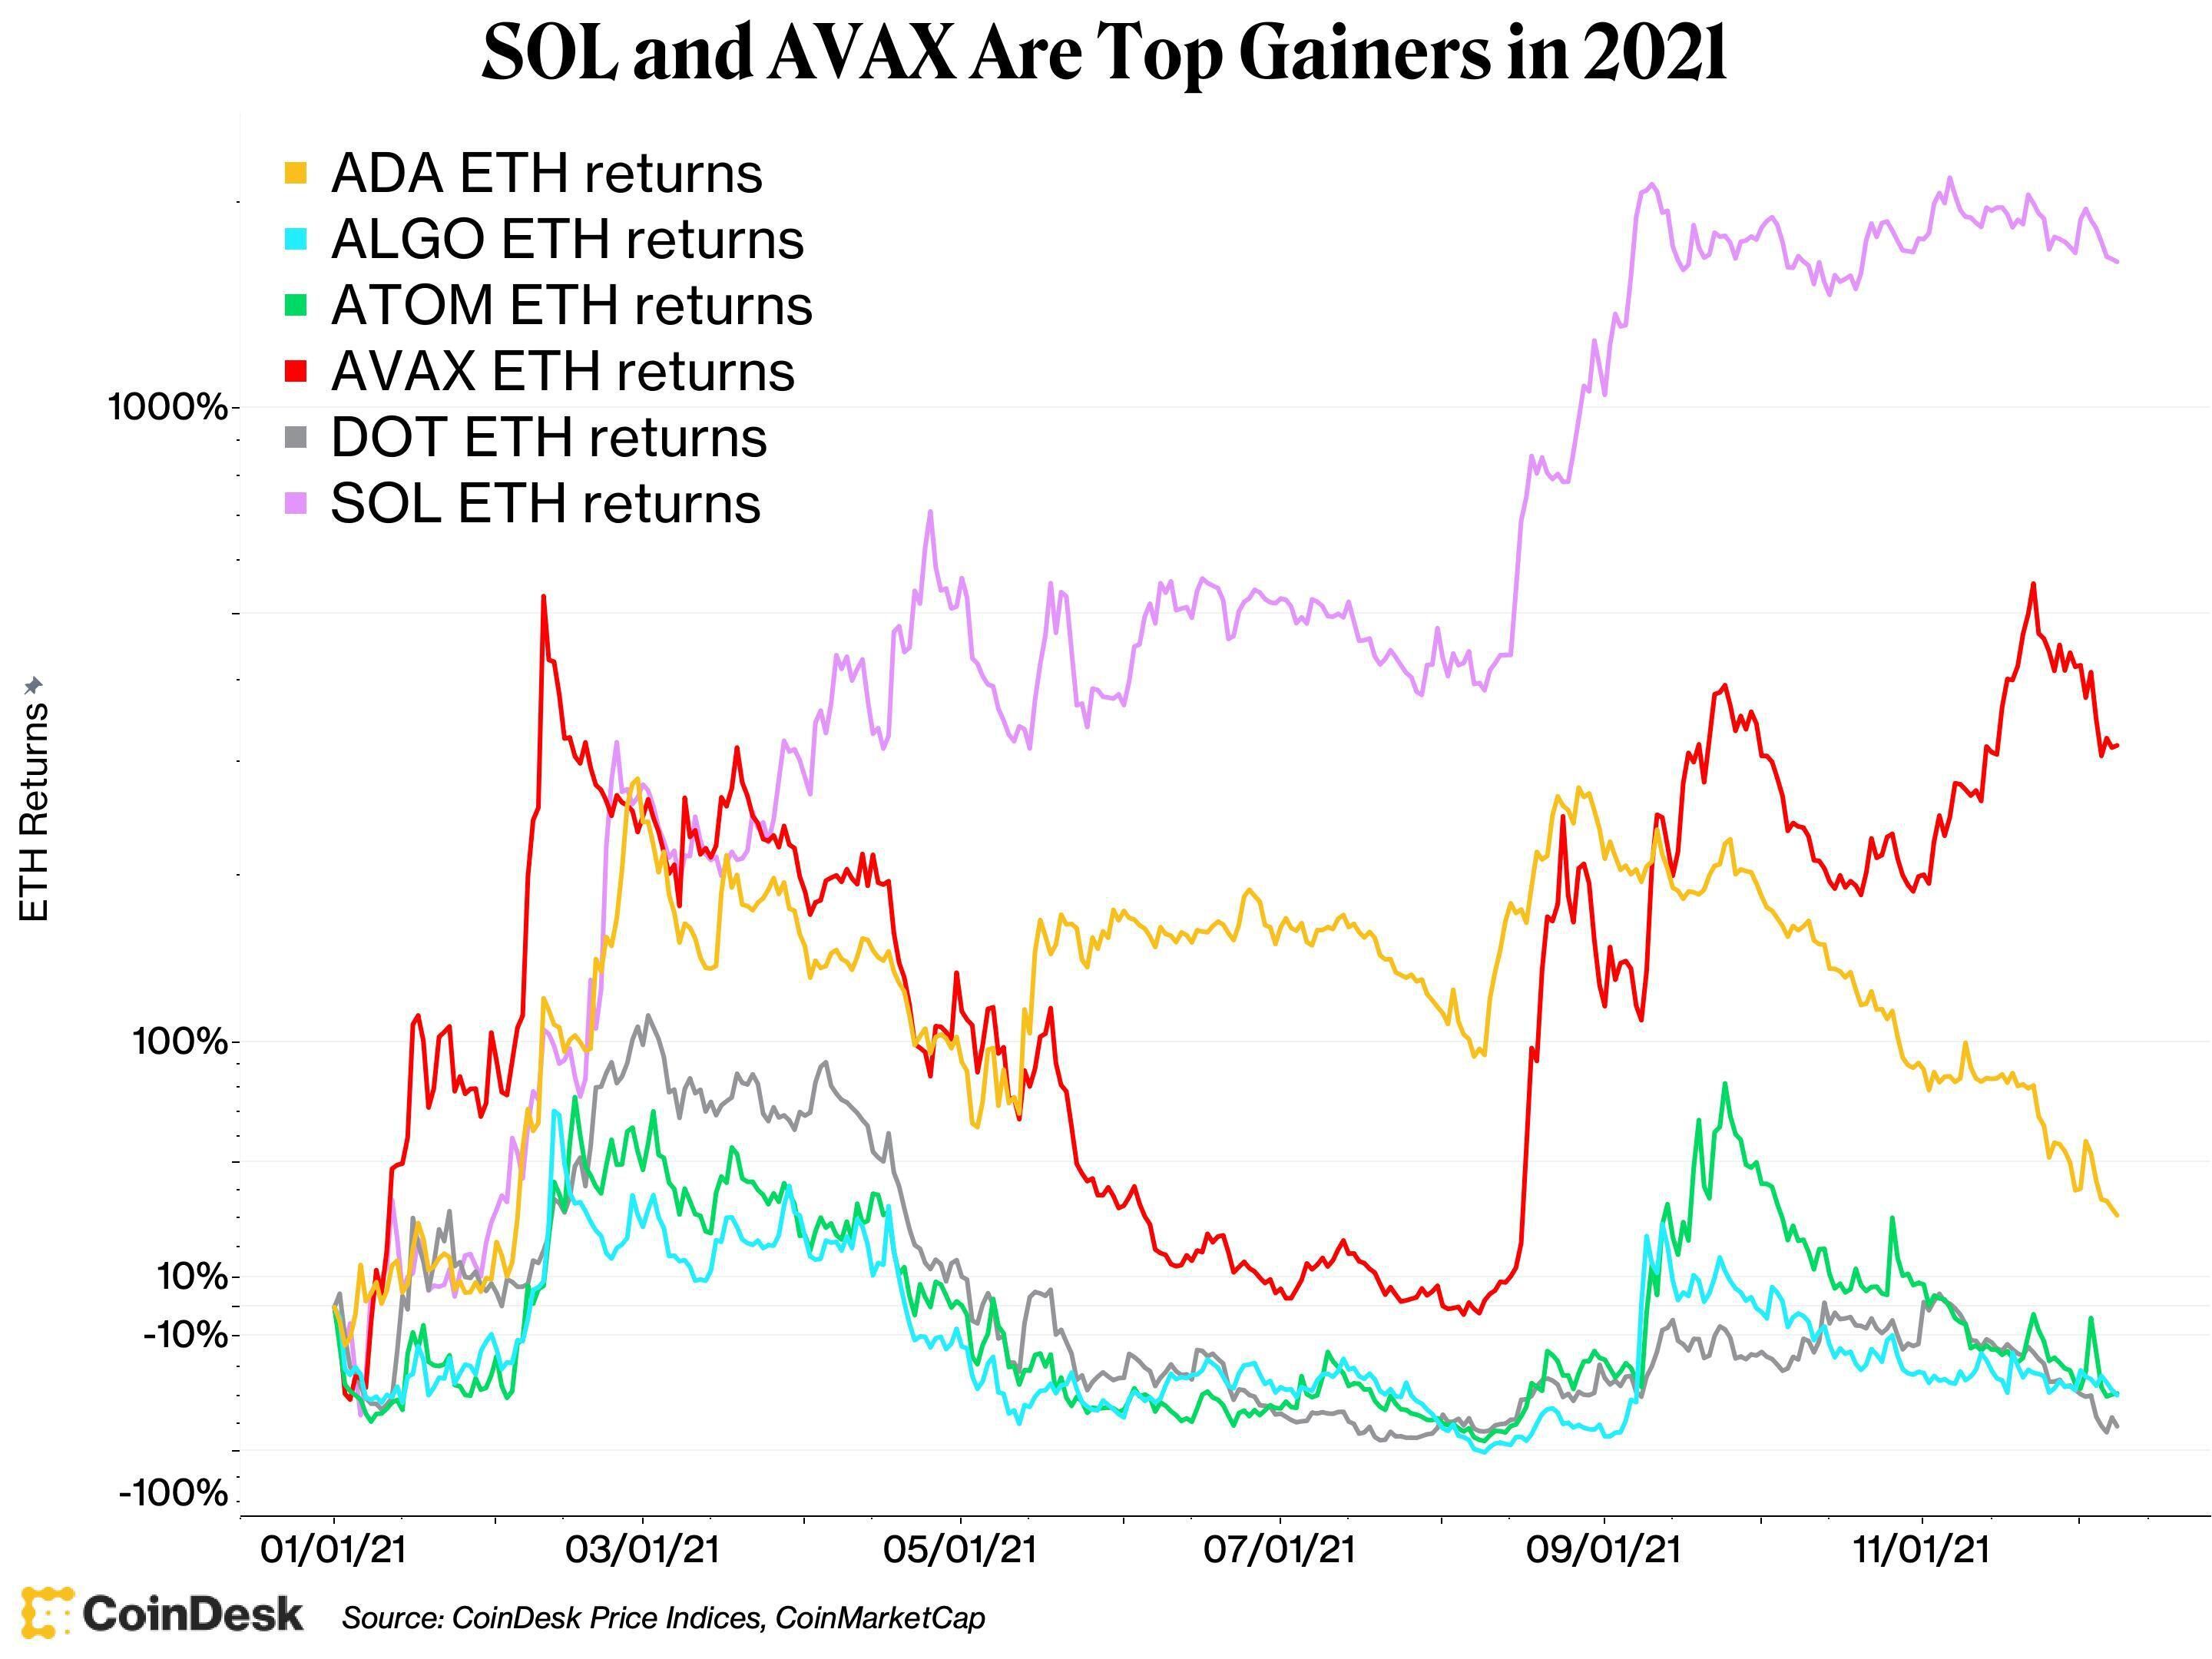 Alt Layer 1 coins year-to-date returns, price in ether (logarithmic scale).